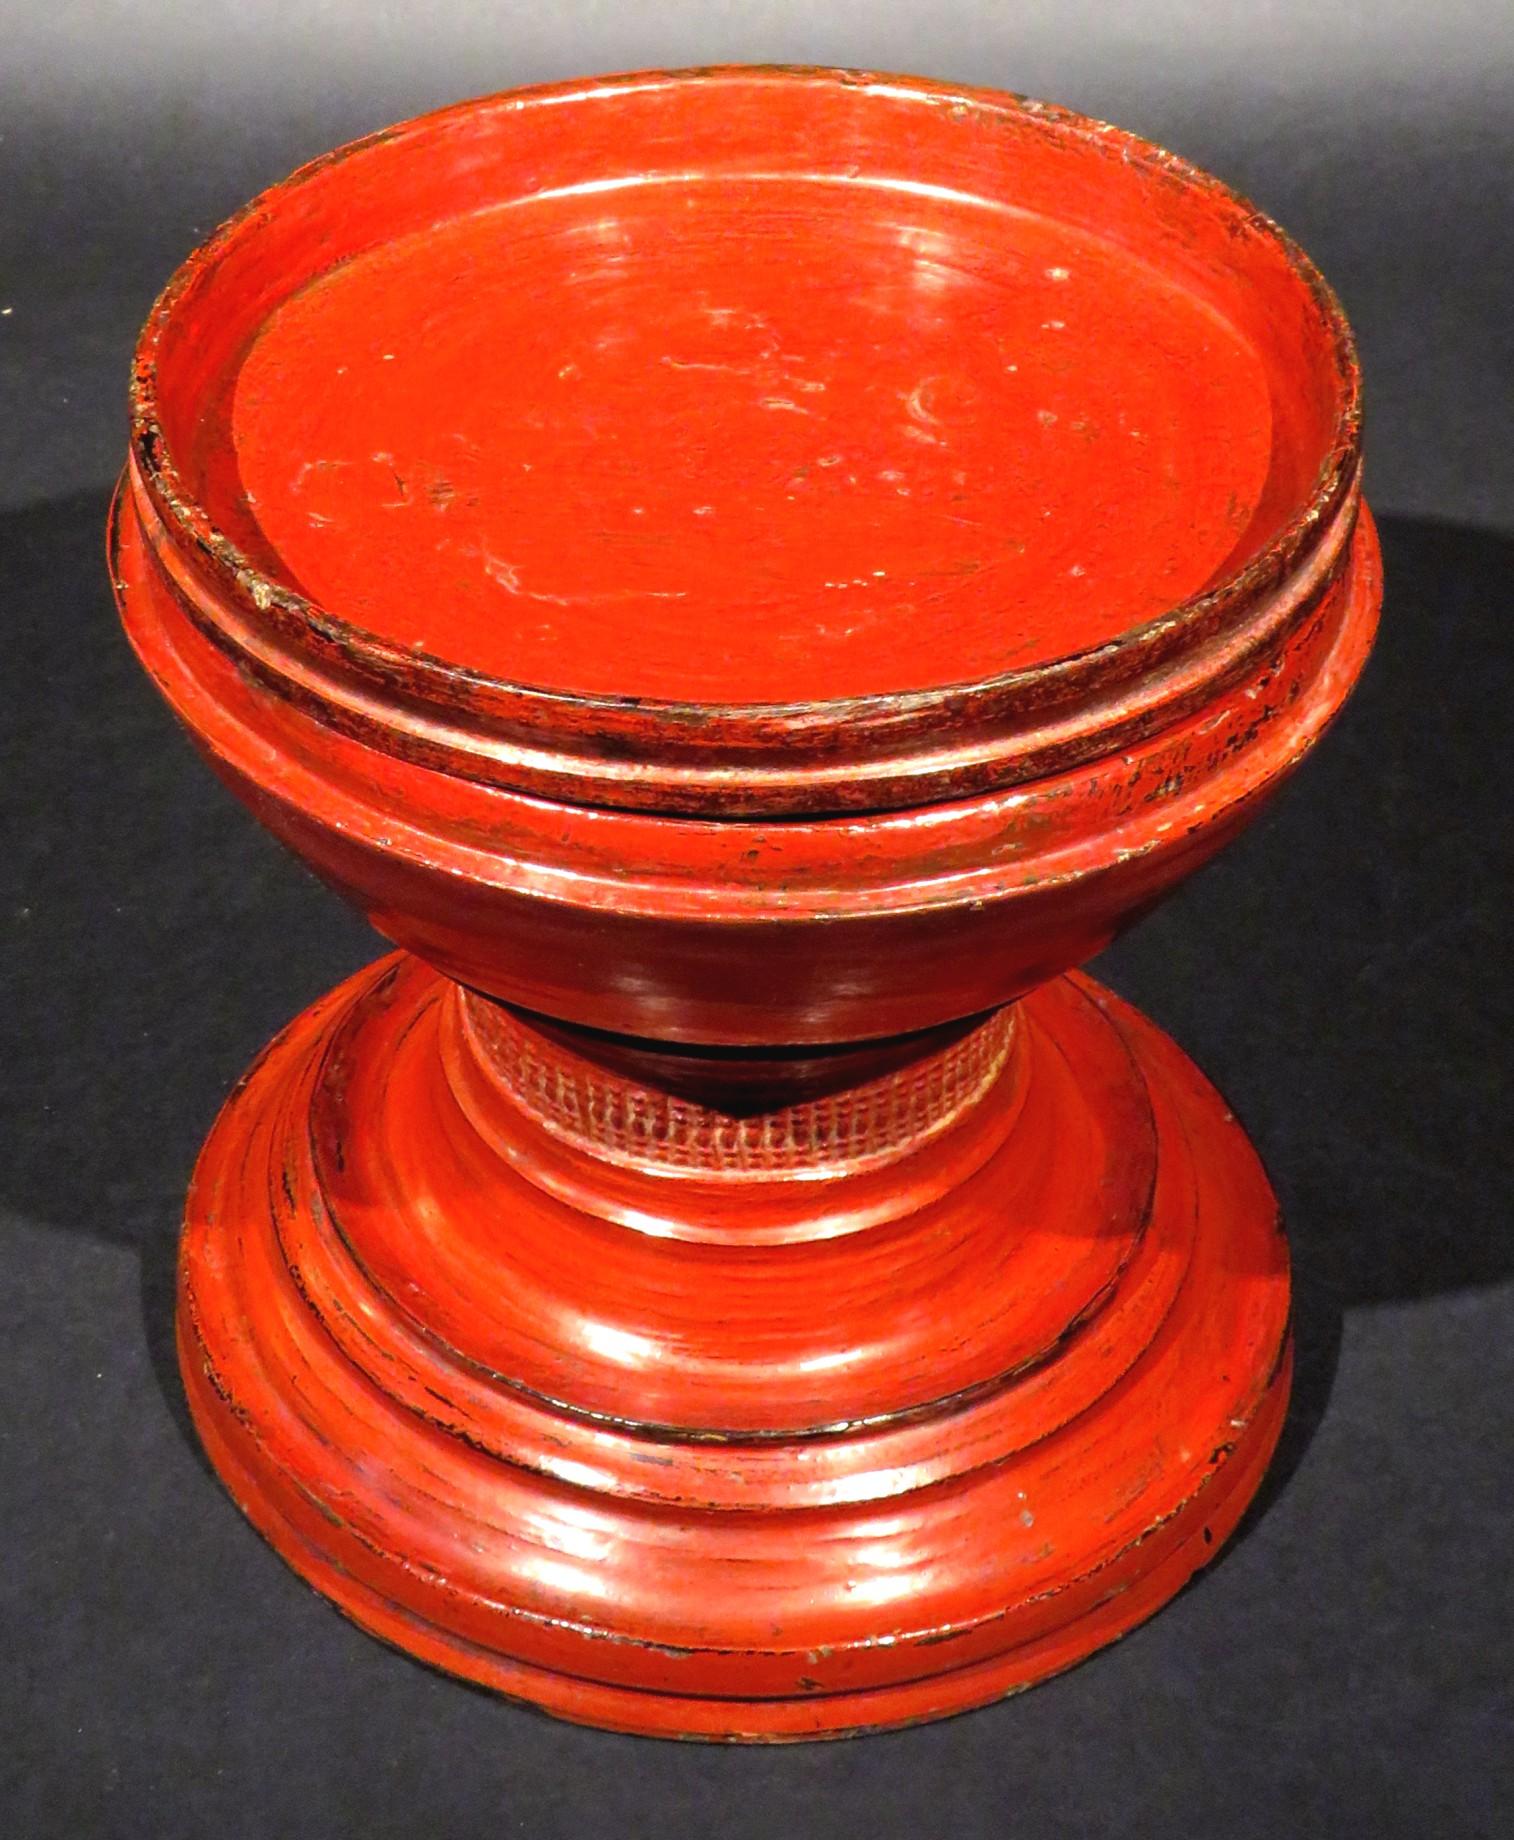 A Highly Decorative 19th Century Hsun-ok (Offering Bowl), Burmese Circa 1920 In Good Condition For Sale In Ottawa, Ontario